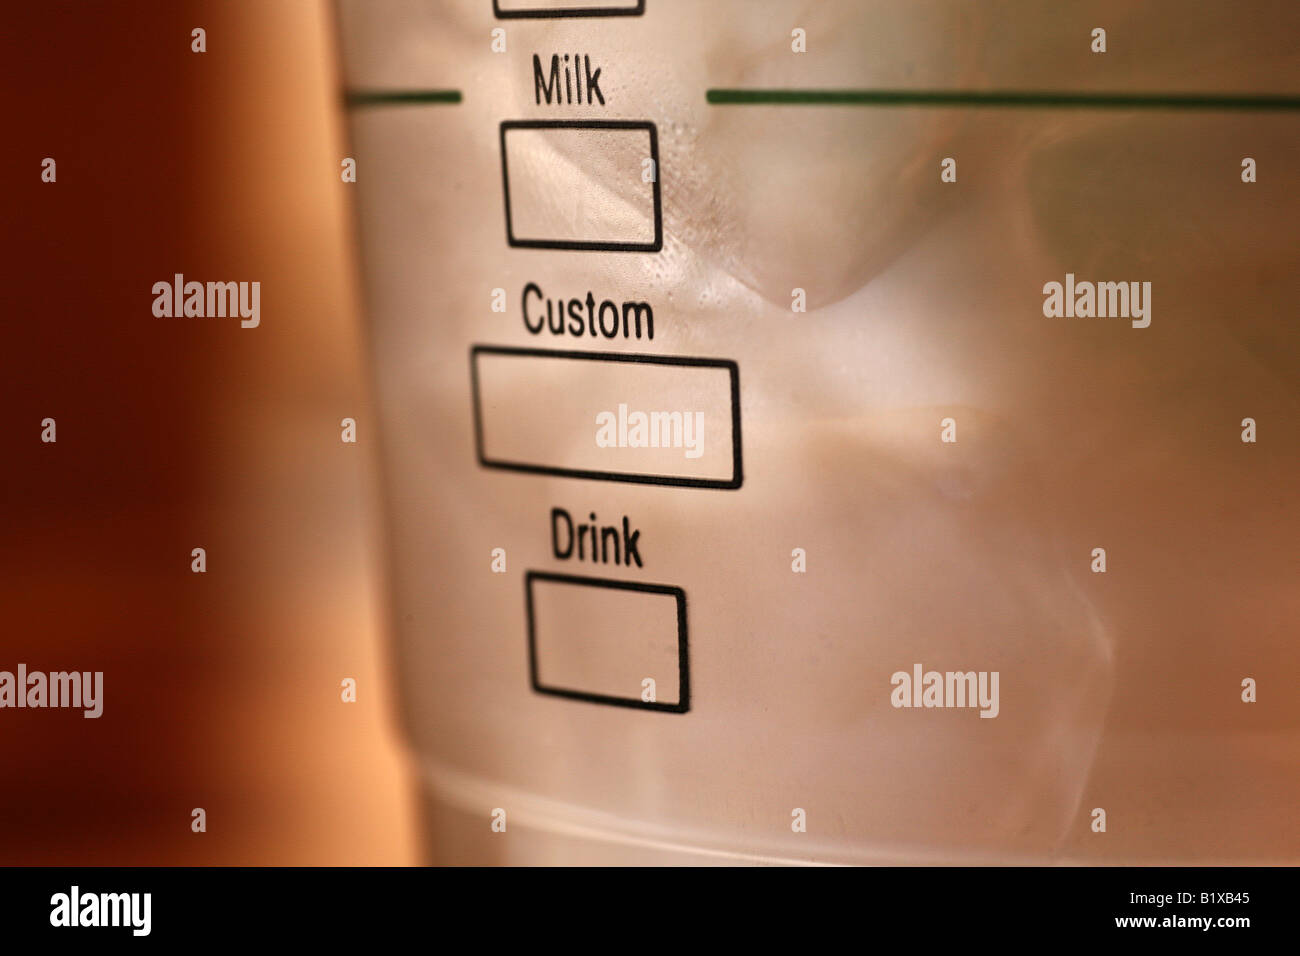 Custom drink served in a plastic cup. Can digitally tick either of the boxes. Coffee culture. Stock Photo